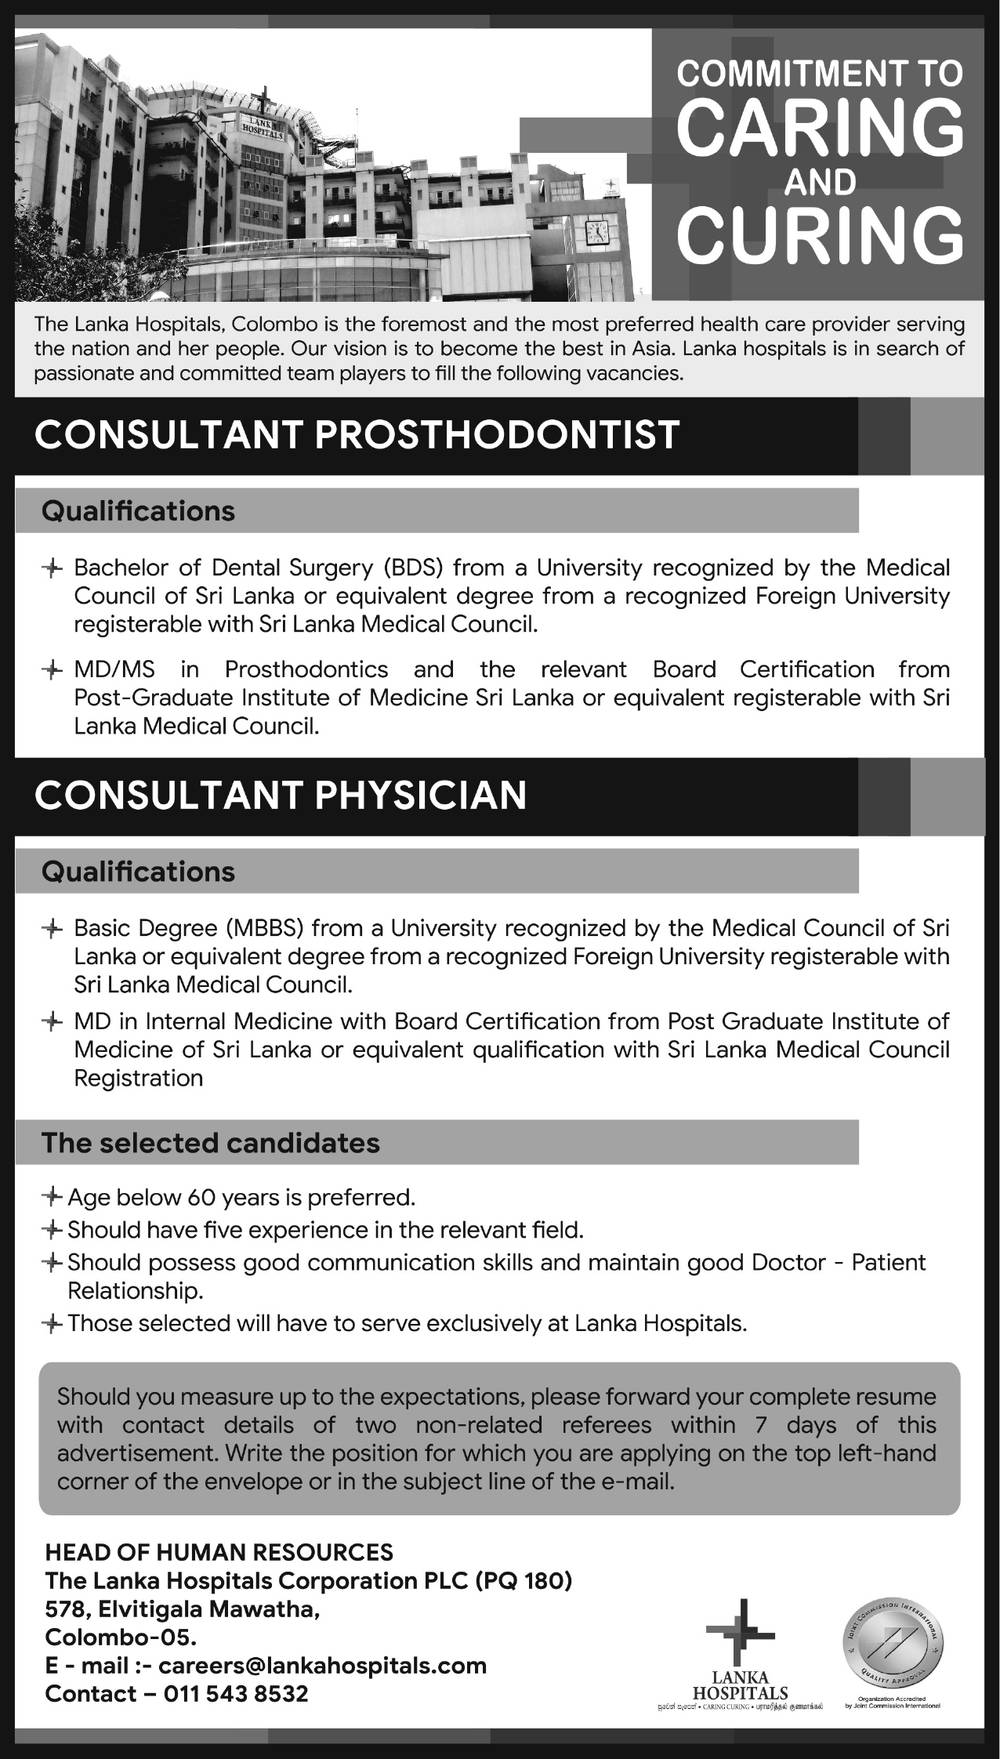 You are currently viewing Consultant Prosthodontist / Consultant Physician